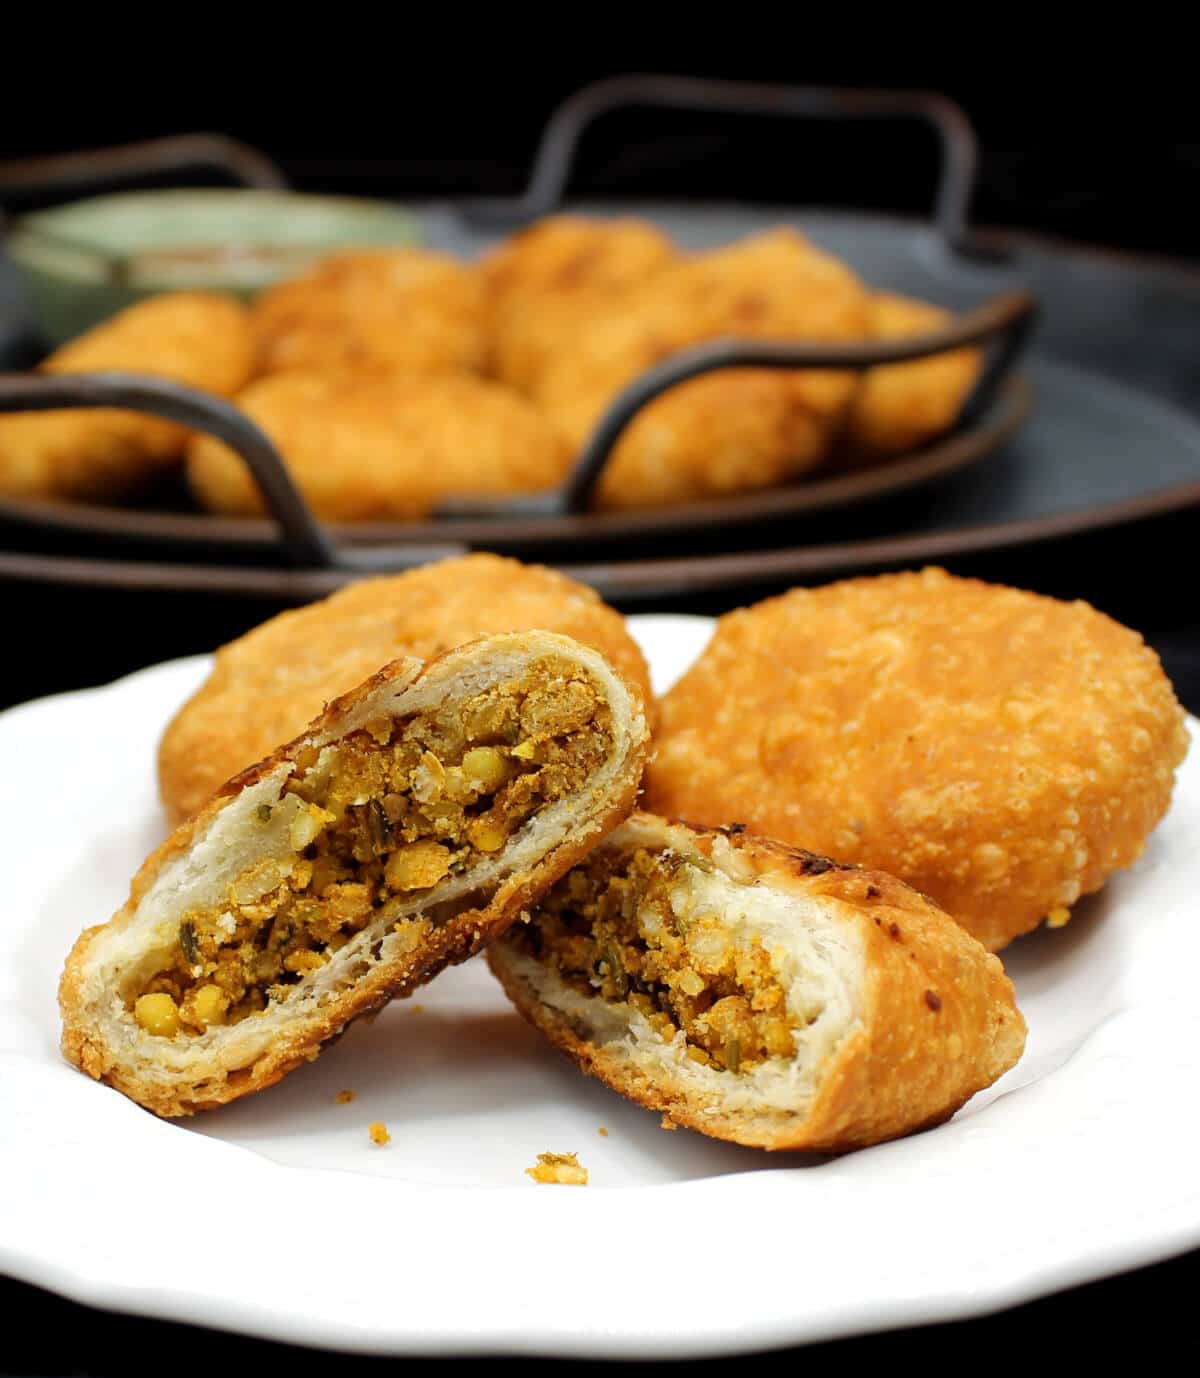 Two kachoris on a white plate with a stuffing of moong dal, besan, fennel and other spices, with a serving tray of more kachoris in the background.